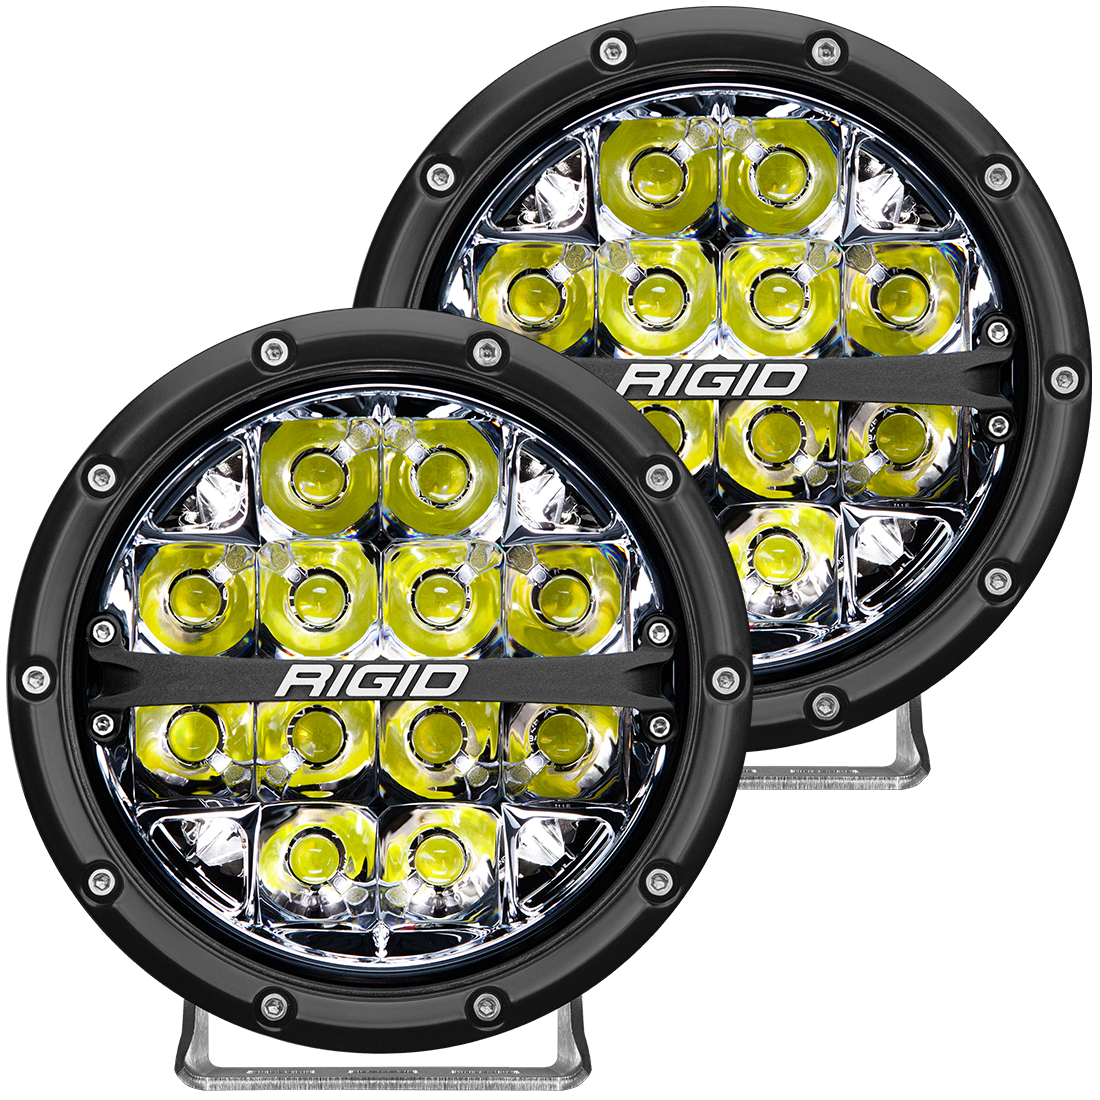 Rigid Industries 360-Series 6 Inch Led Off-Road Spot Beam White Backlight Pair